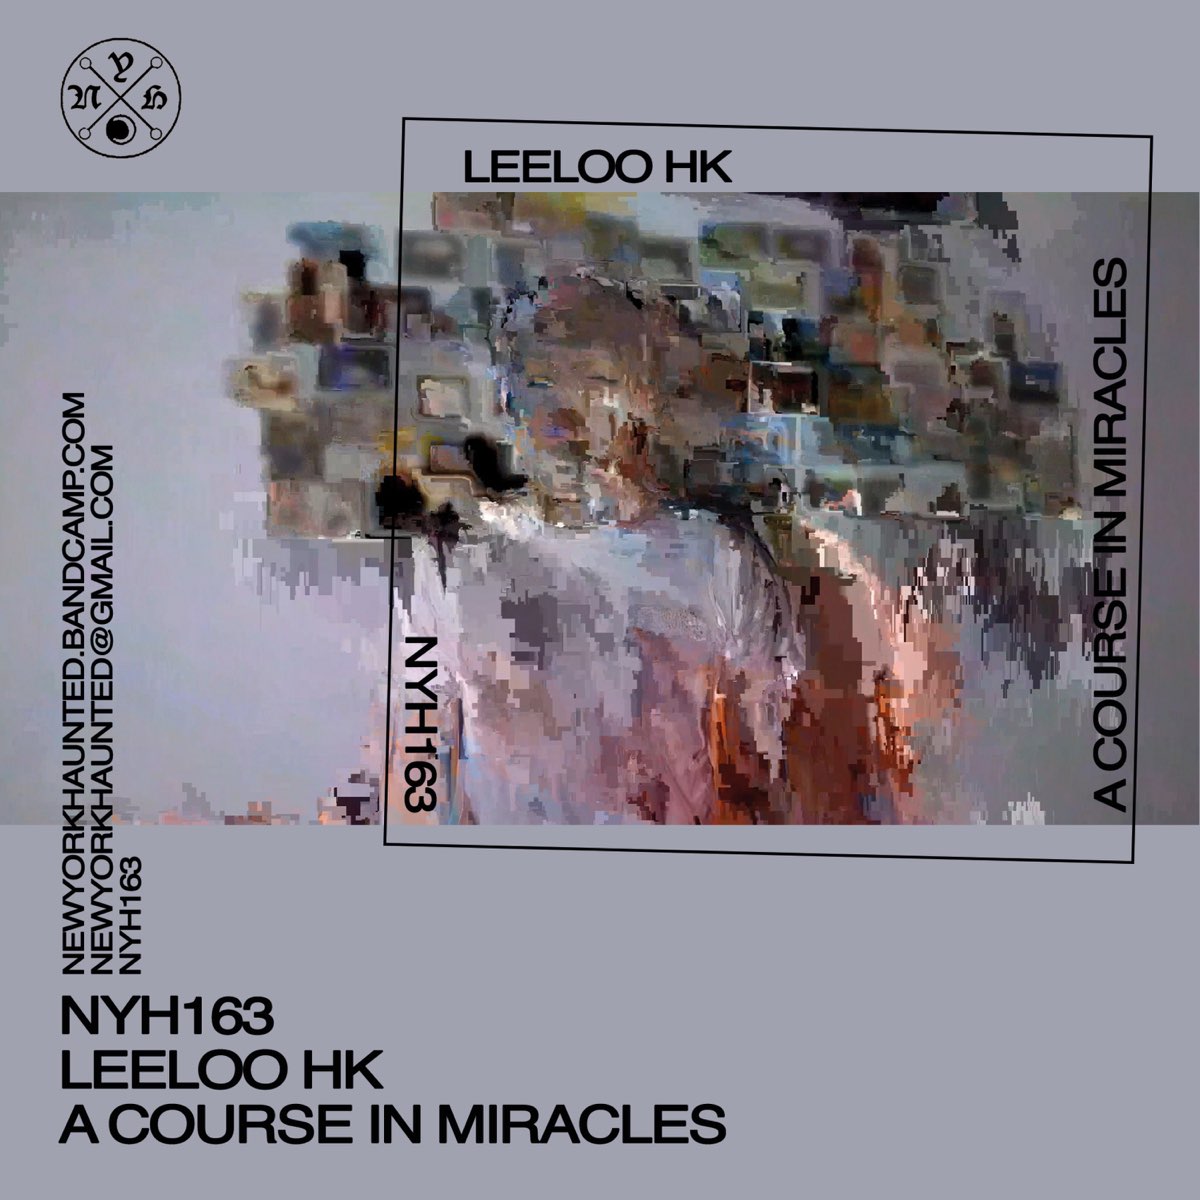 A Course In Miracles - EP by Leeloo Hk on Apple Music